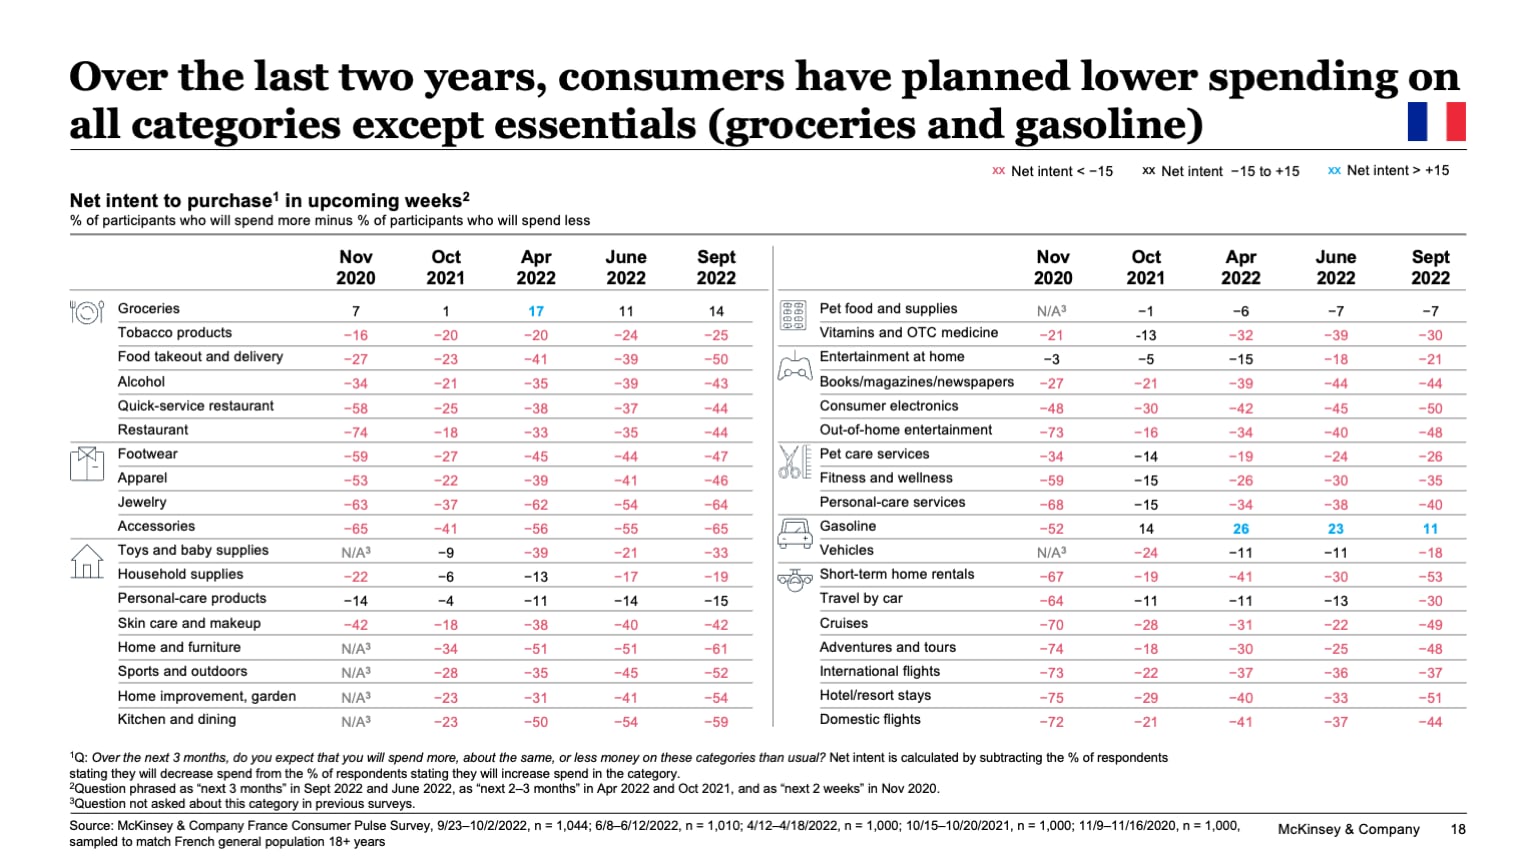 Over the last two years, consumers have planned lower spending on all categories except essentials (groceries and gasoline)